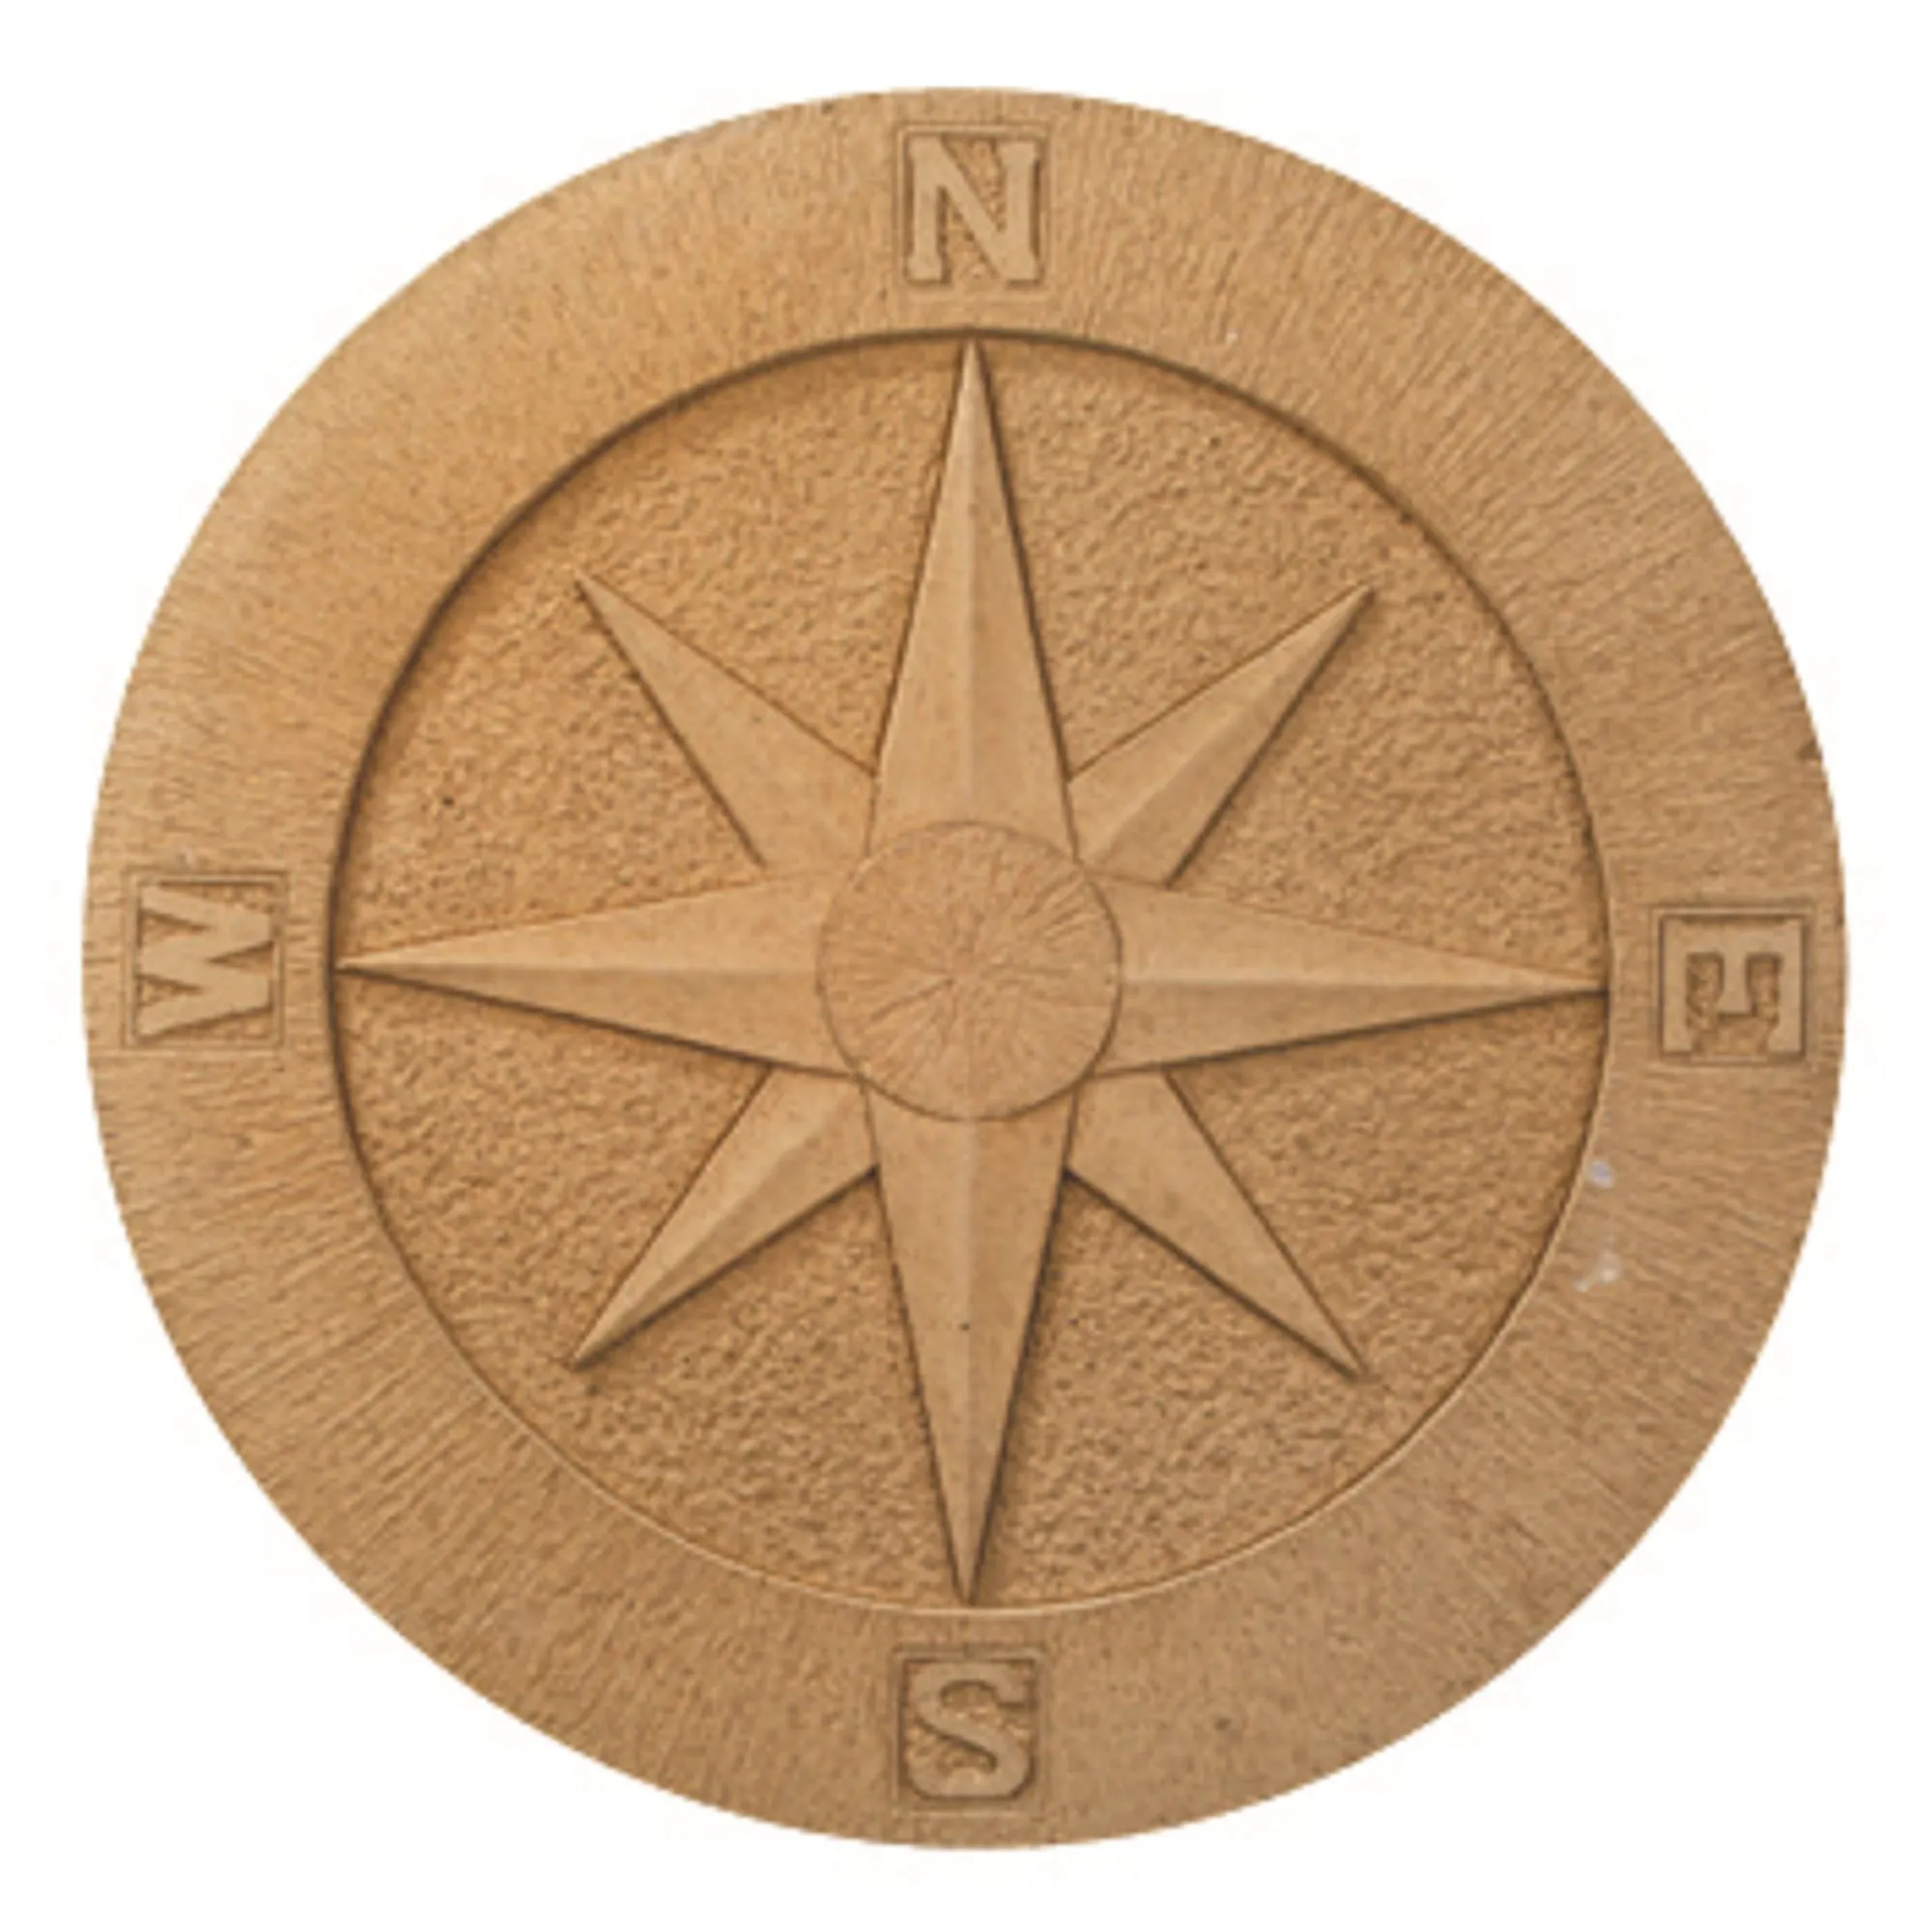 Compass Cotswold Stepping stone